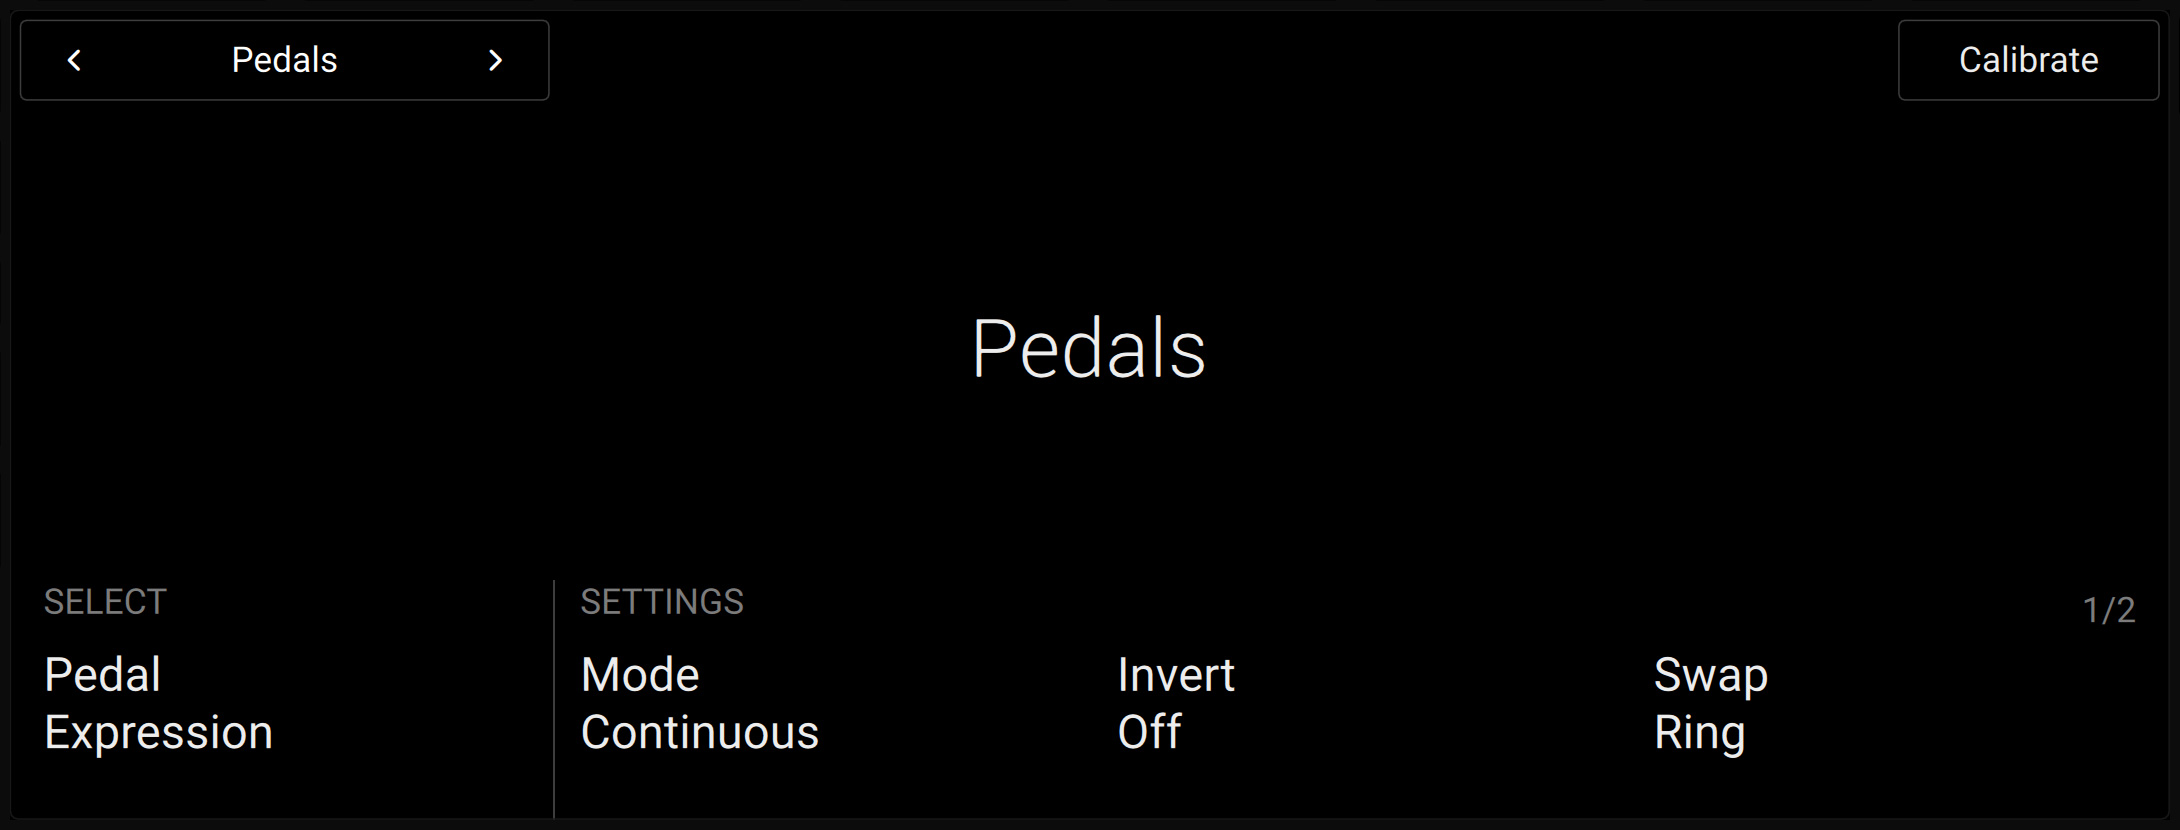 KS-MK3_D_Settings-Pedals-Continuous-Page1.jpg